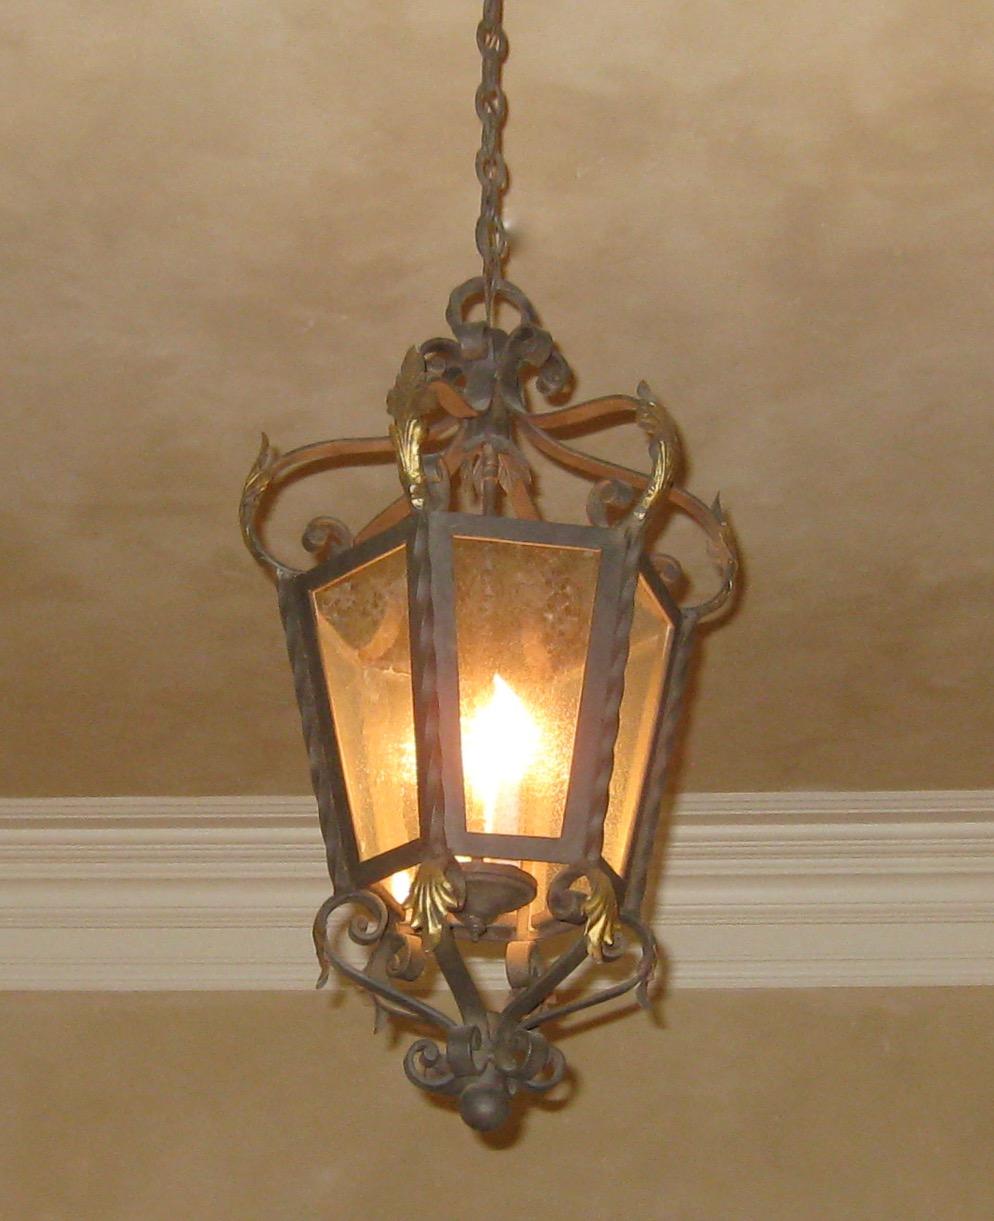 Part of the chandelier product line, this is our Italian Lantern B. This fixture can be used for interior or exterior use and is UL listed. 3' chain included. Three candelabra base bulbs up to 60 watts/socket. Also available in a lighter iron gauge